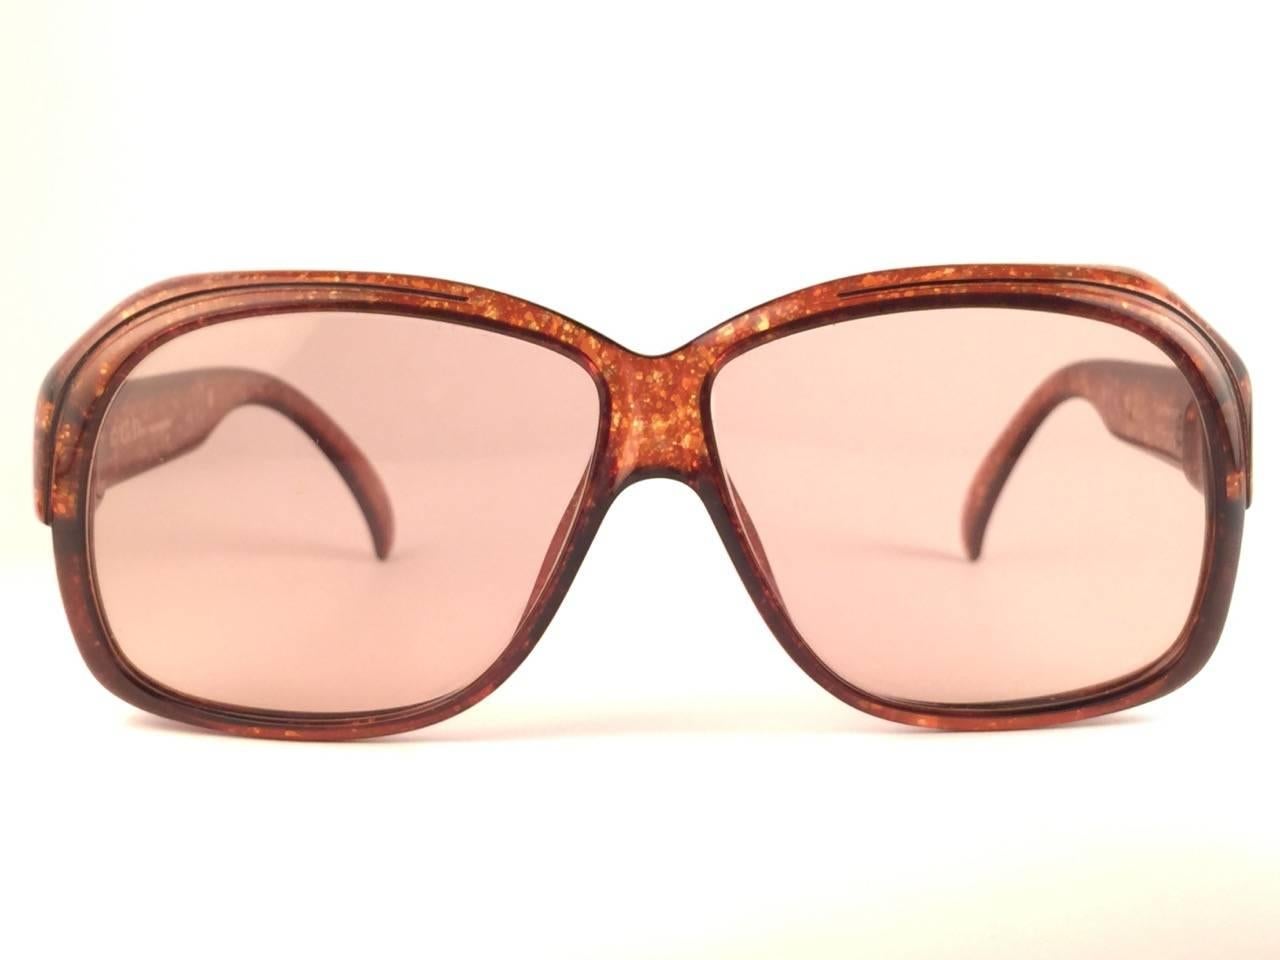 New Vintage Christian Dior 2039 10 sunglasses oversized marble pattern brown lenses 1970’s made by optyl manufactured in Germany
 
Strong and stunning marbled pattern frame. A must have piece! Lenses are spotless brown.
 
New! never worn or